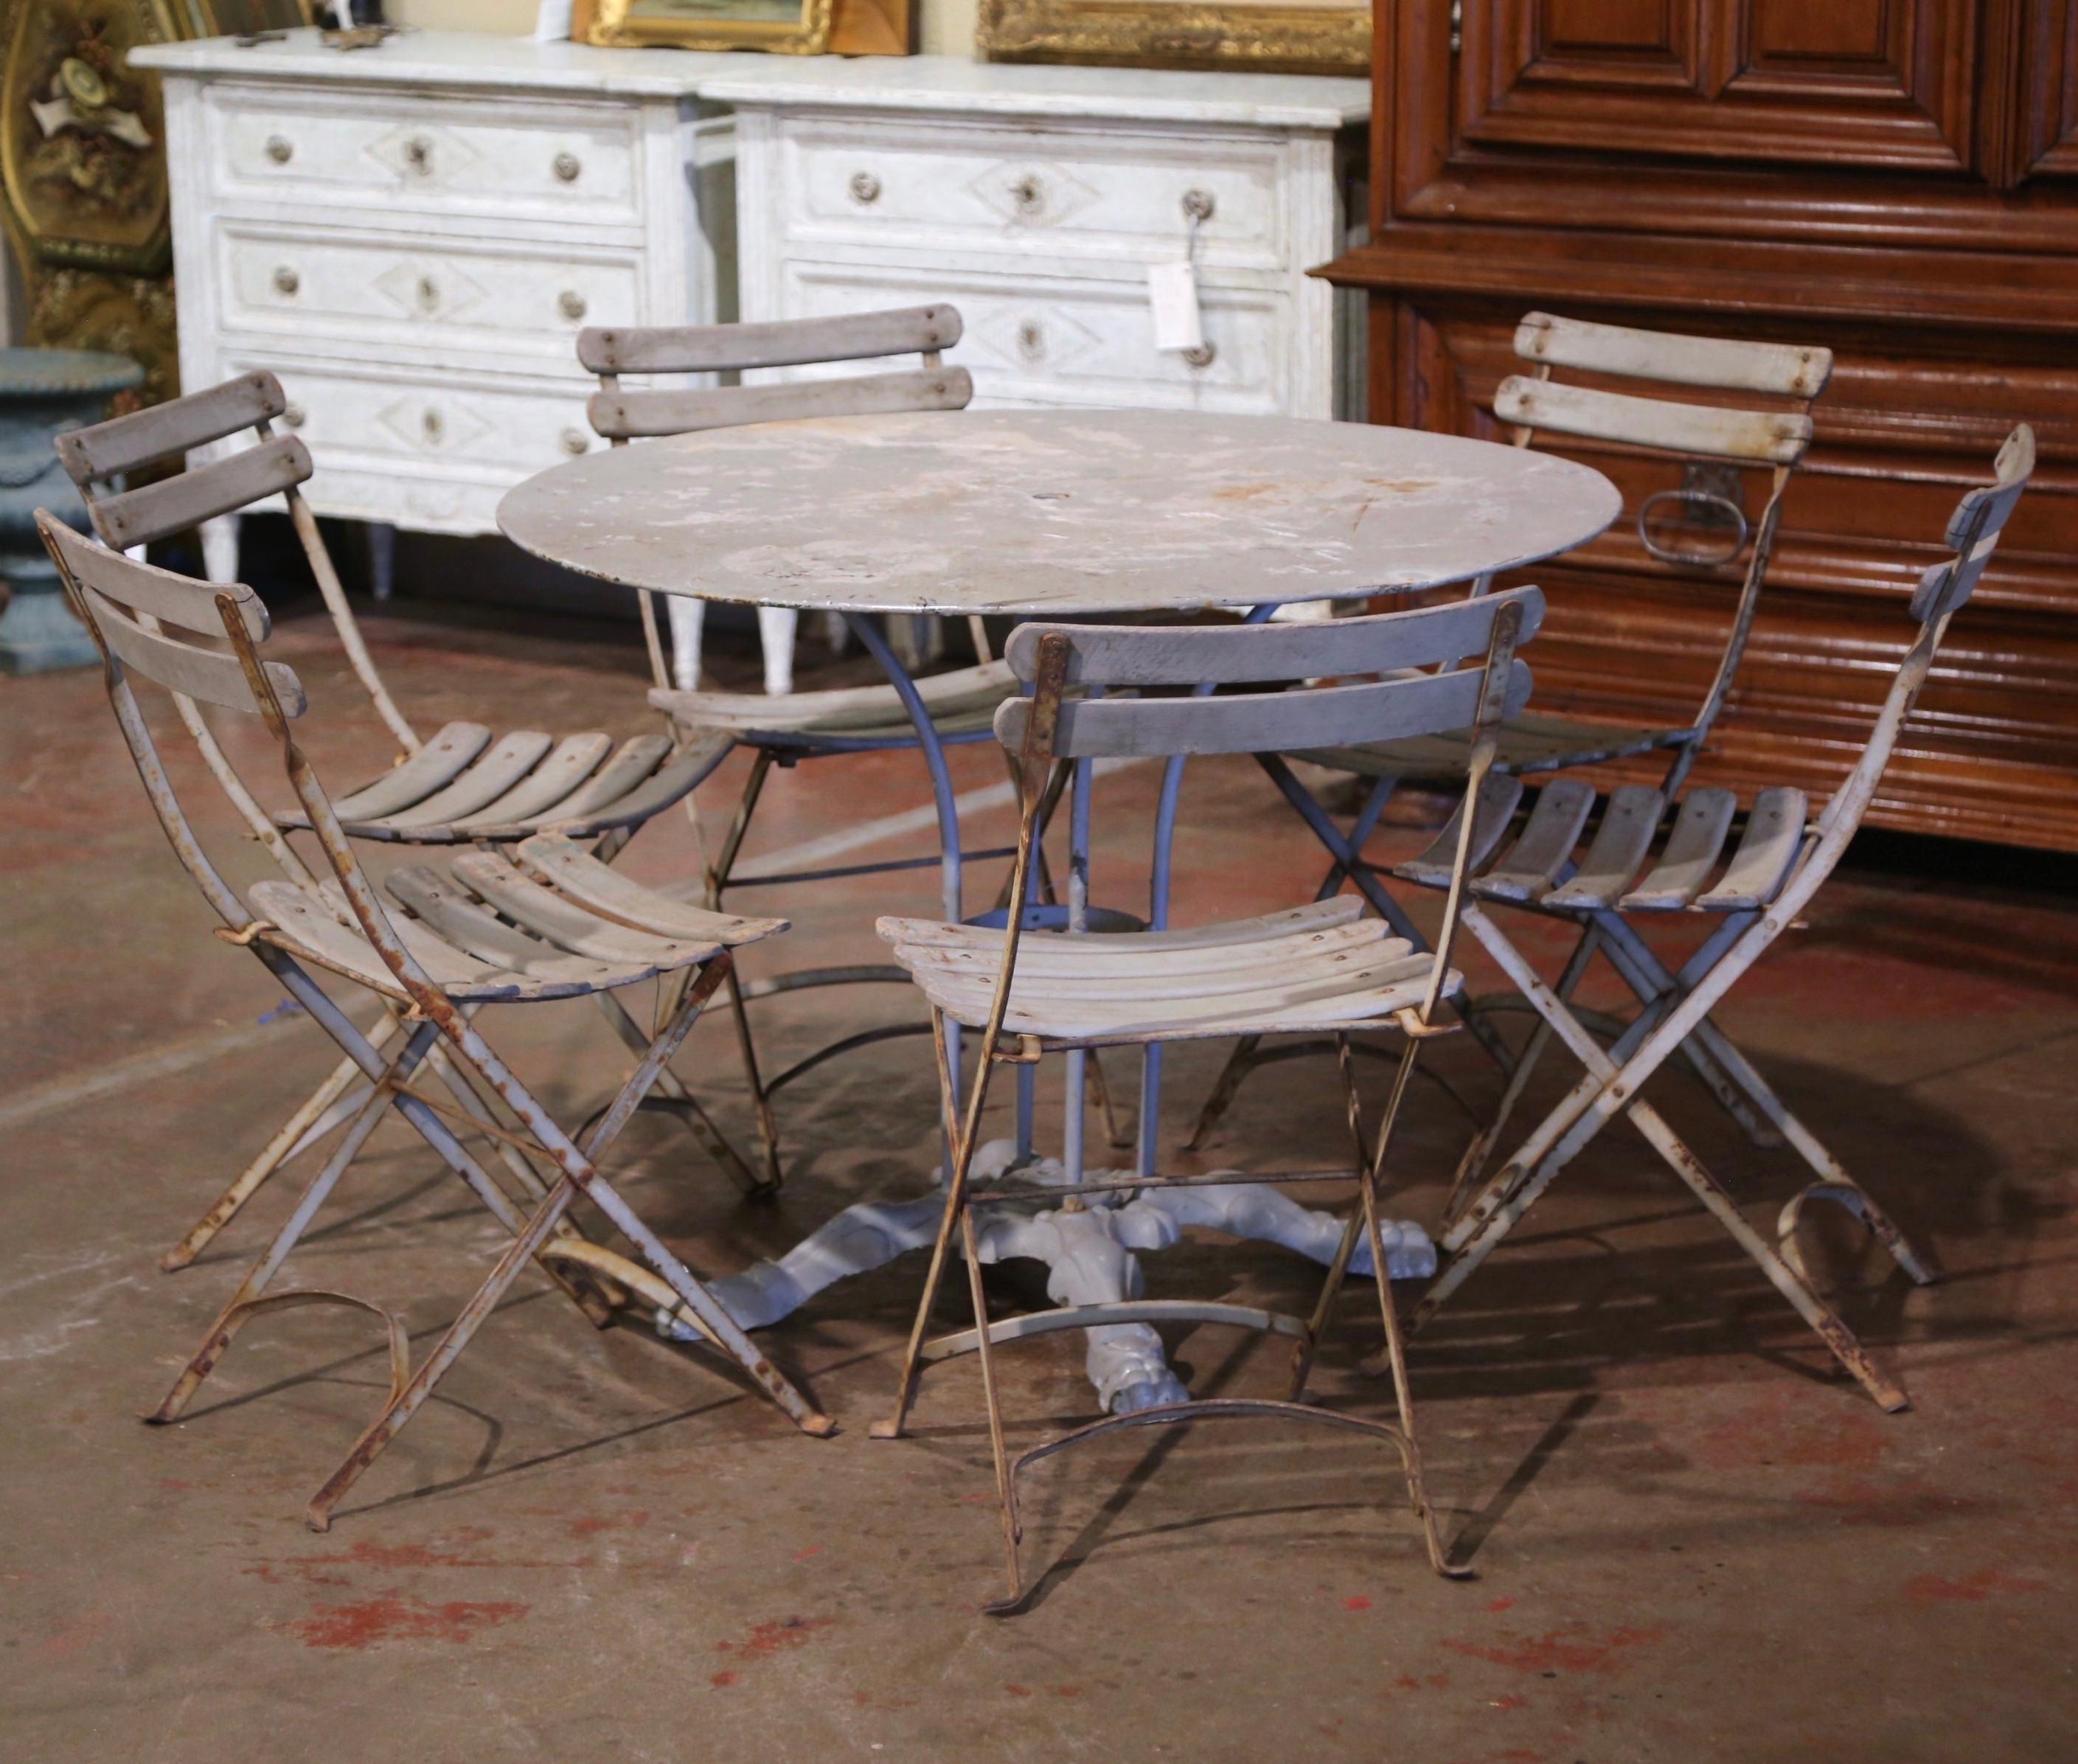 Early 20th Century French Painted Iron Outdoor Garden Table and Set of 6 Chairs 2